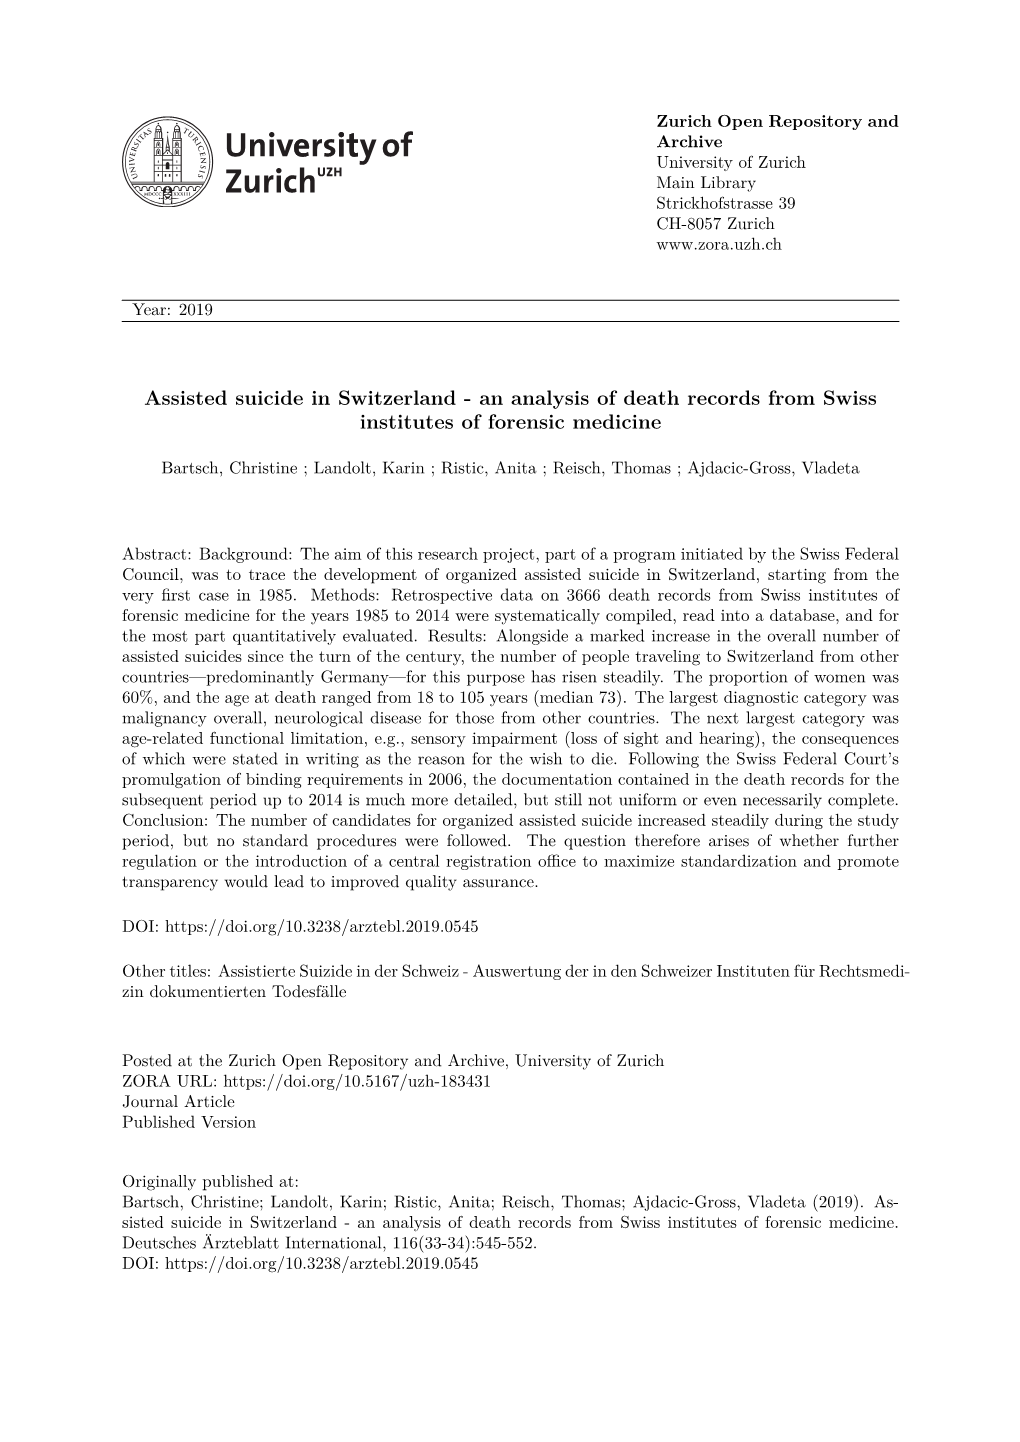 Assisted Suicide in Switzerland - an Analysis of Death Records from Swiss Institutes of Forensic Medicine